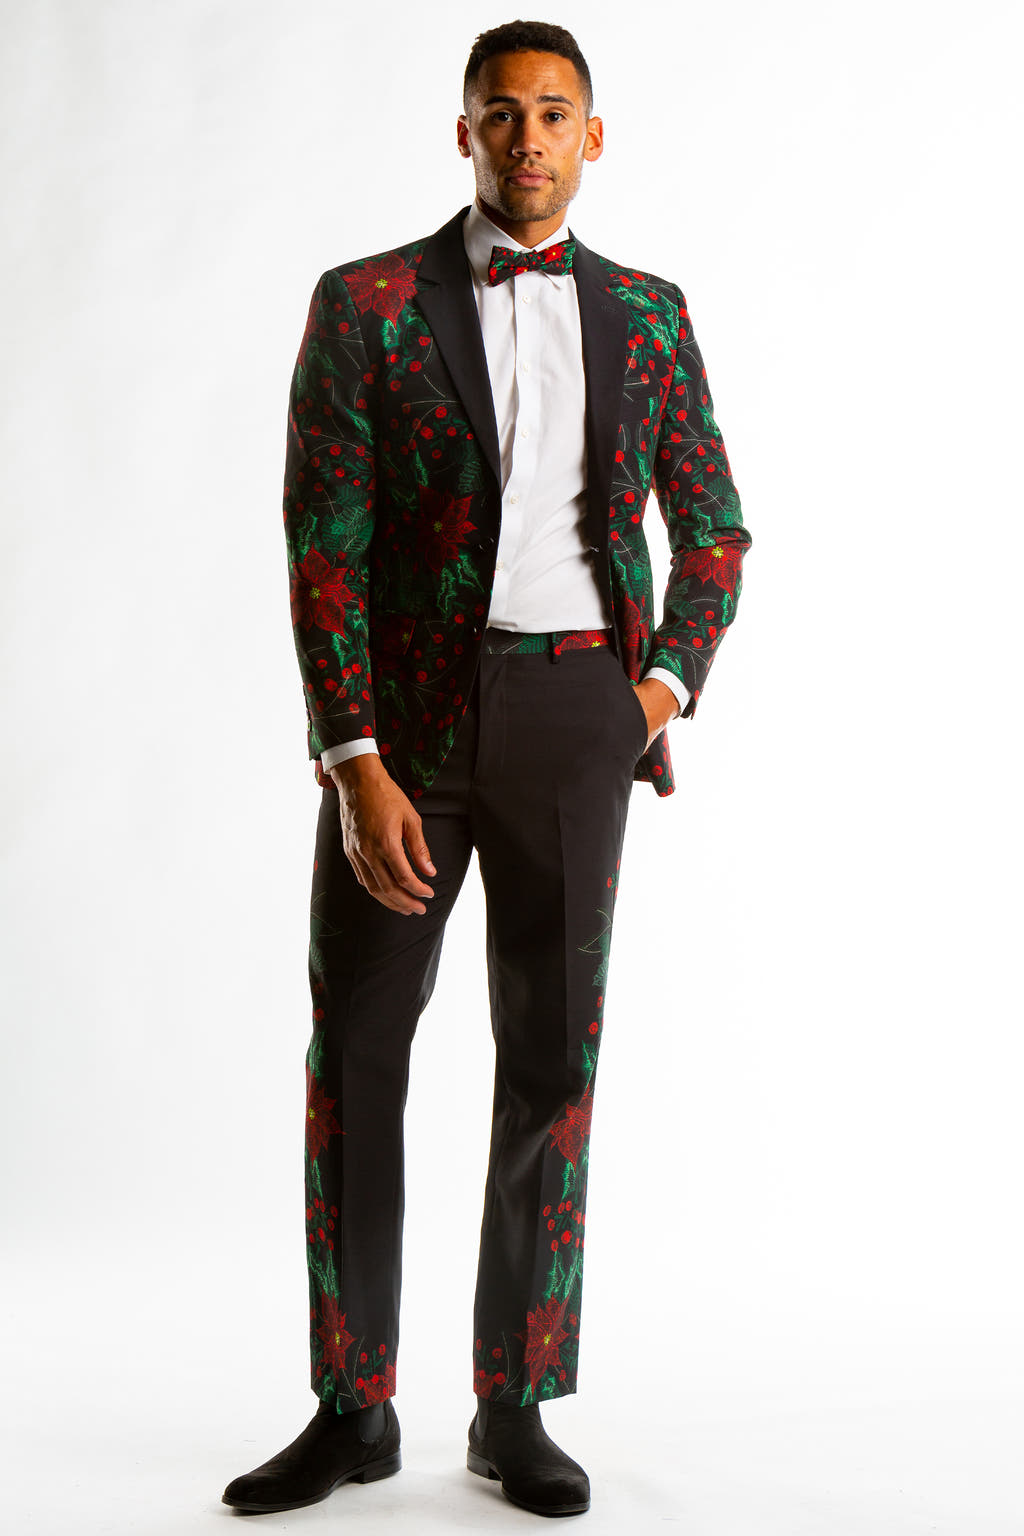 The Centerpiece | Poinsettia Ugly Christmas Suit